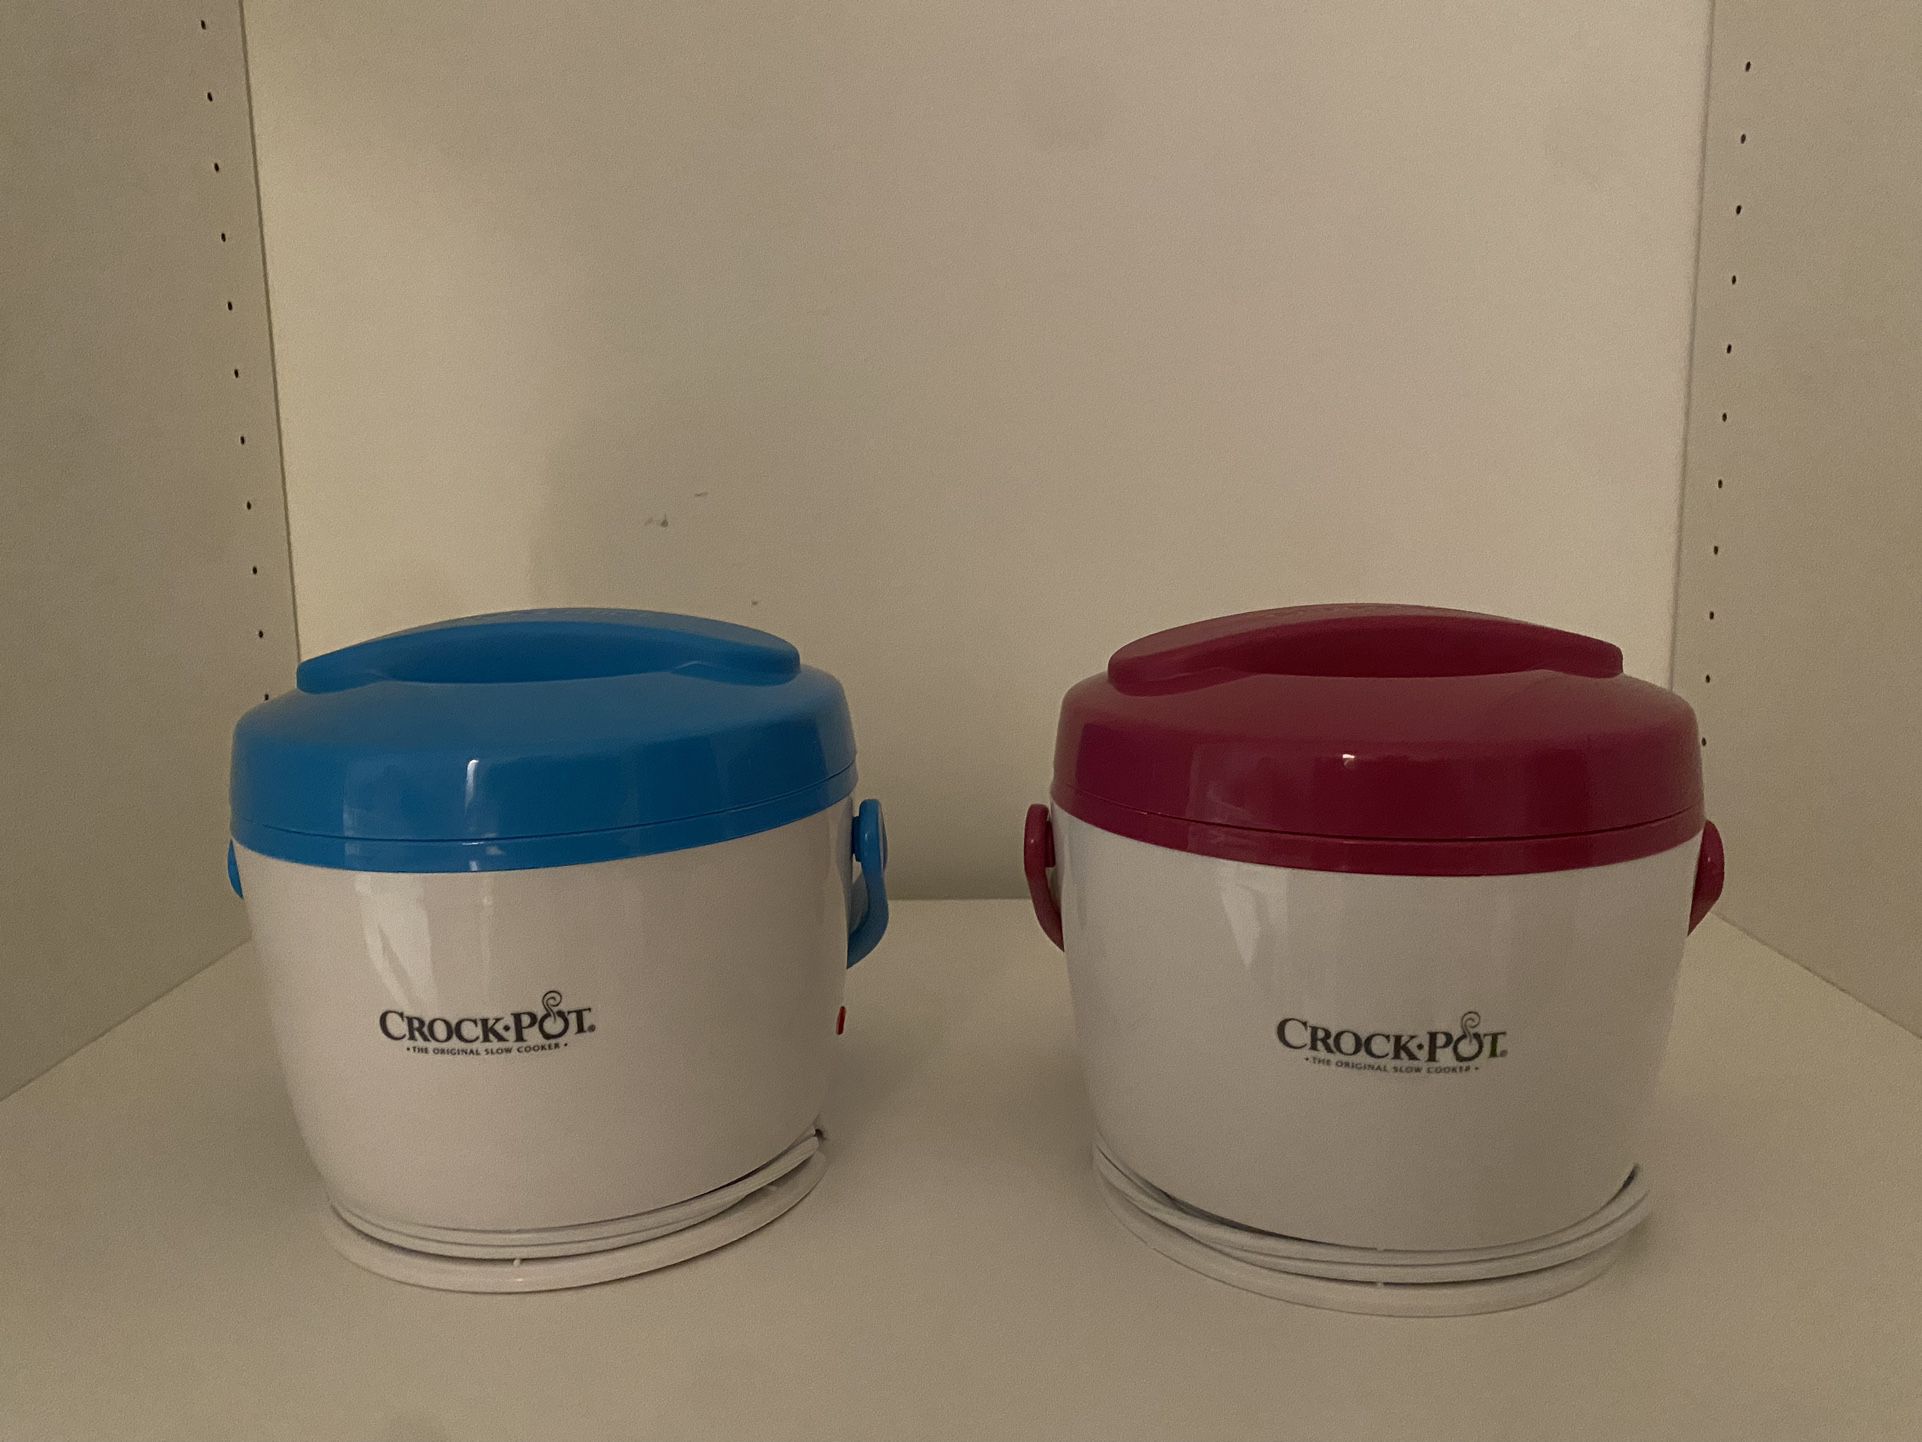 2 Crock Pot Electric Lunch Box, Travel Food Warmer for Sale in Chicago, IL  - OfferUp